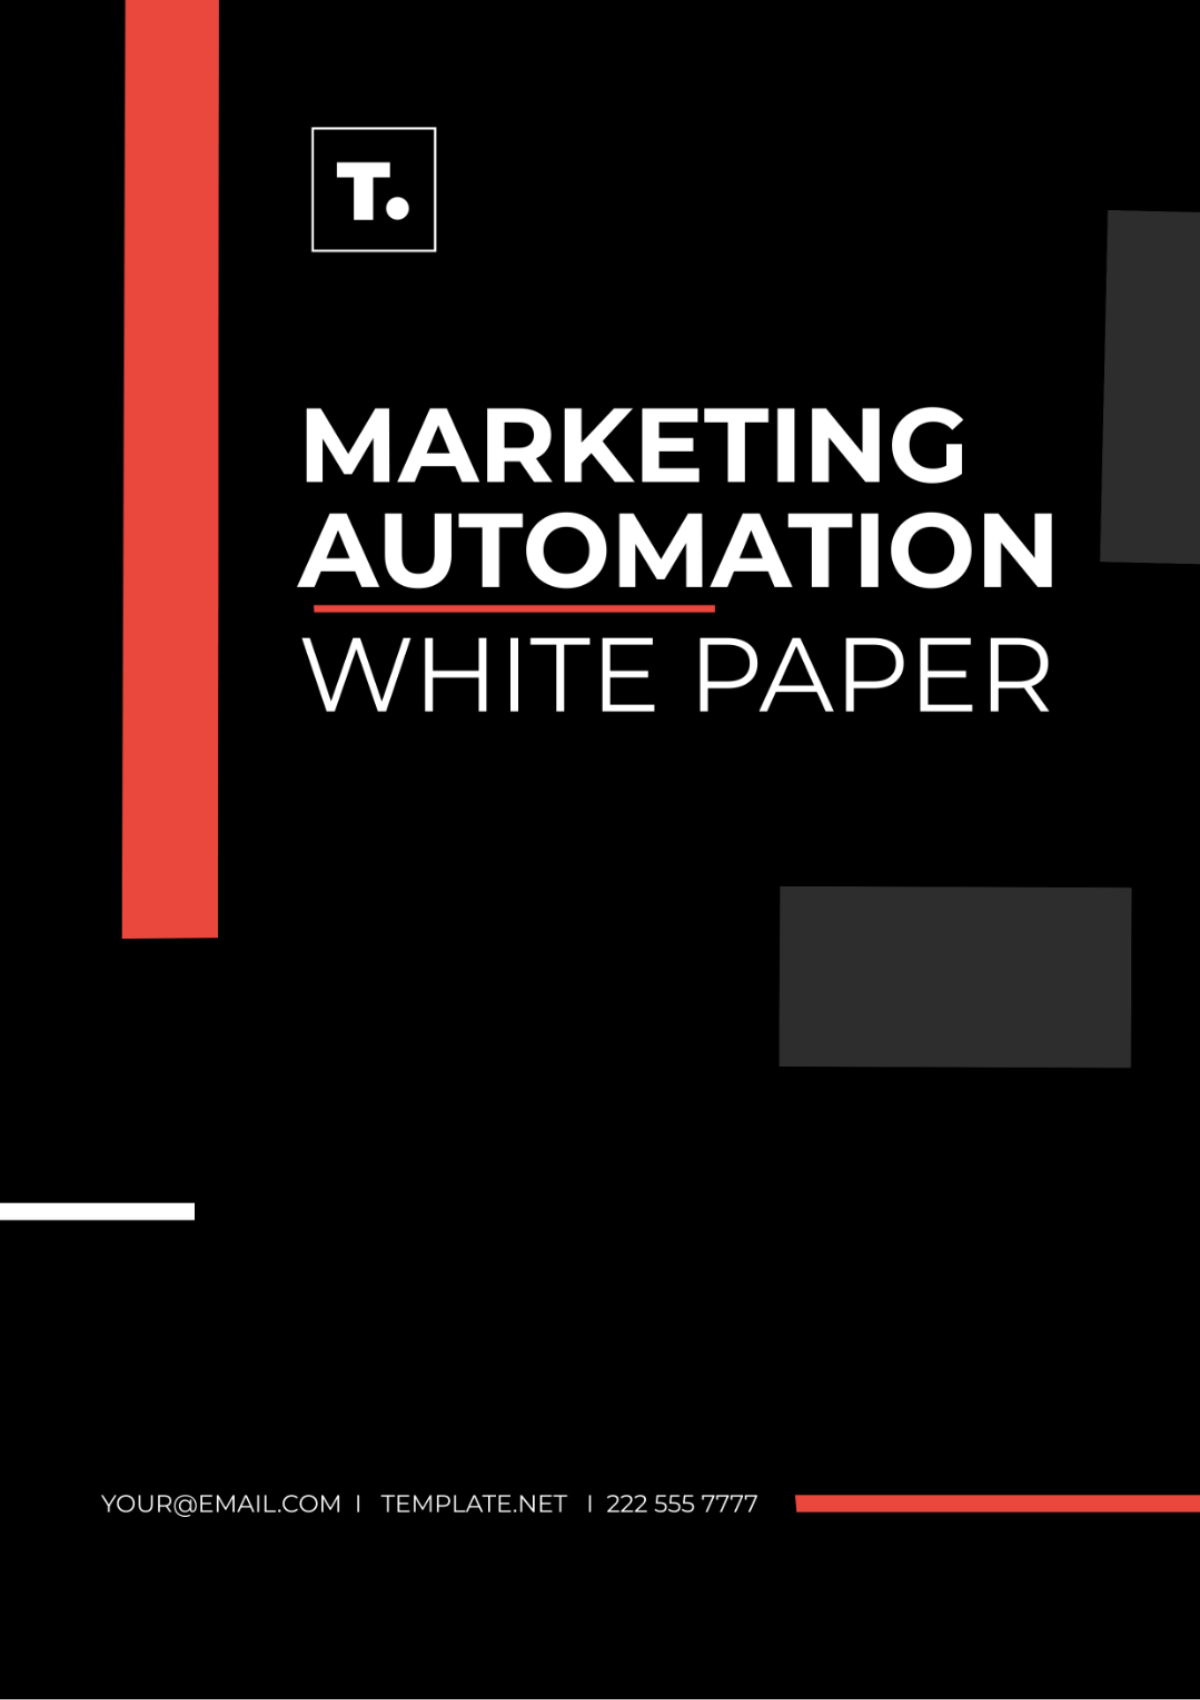 Marketing Automation White Paper Template